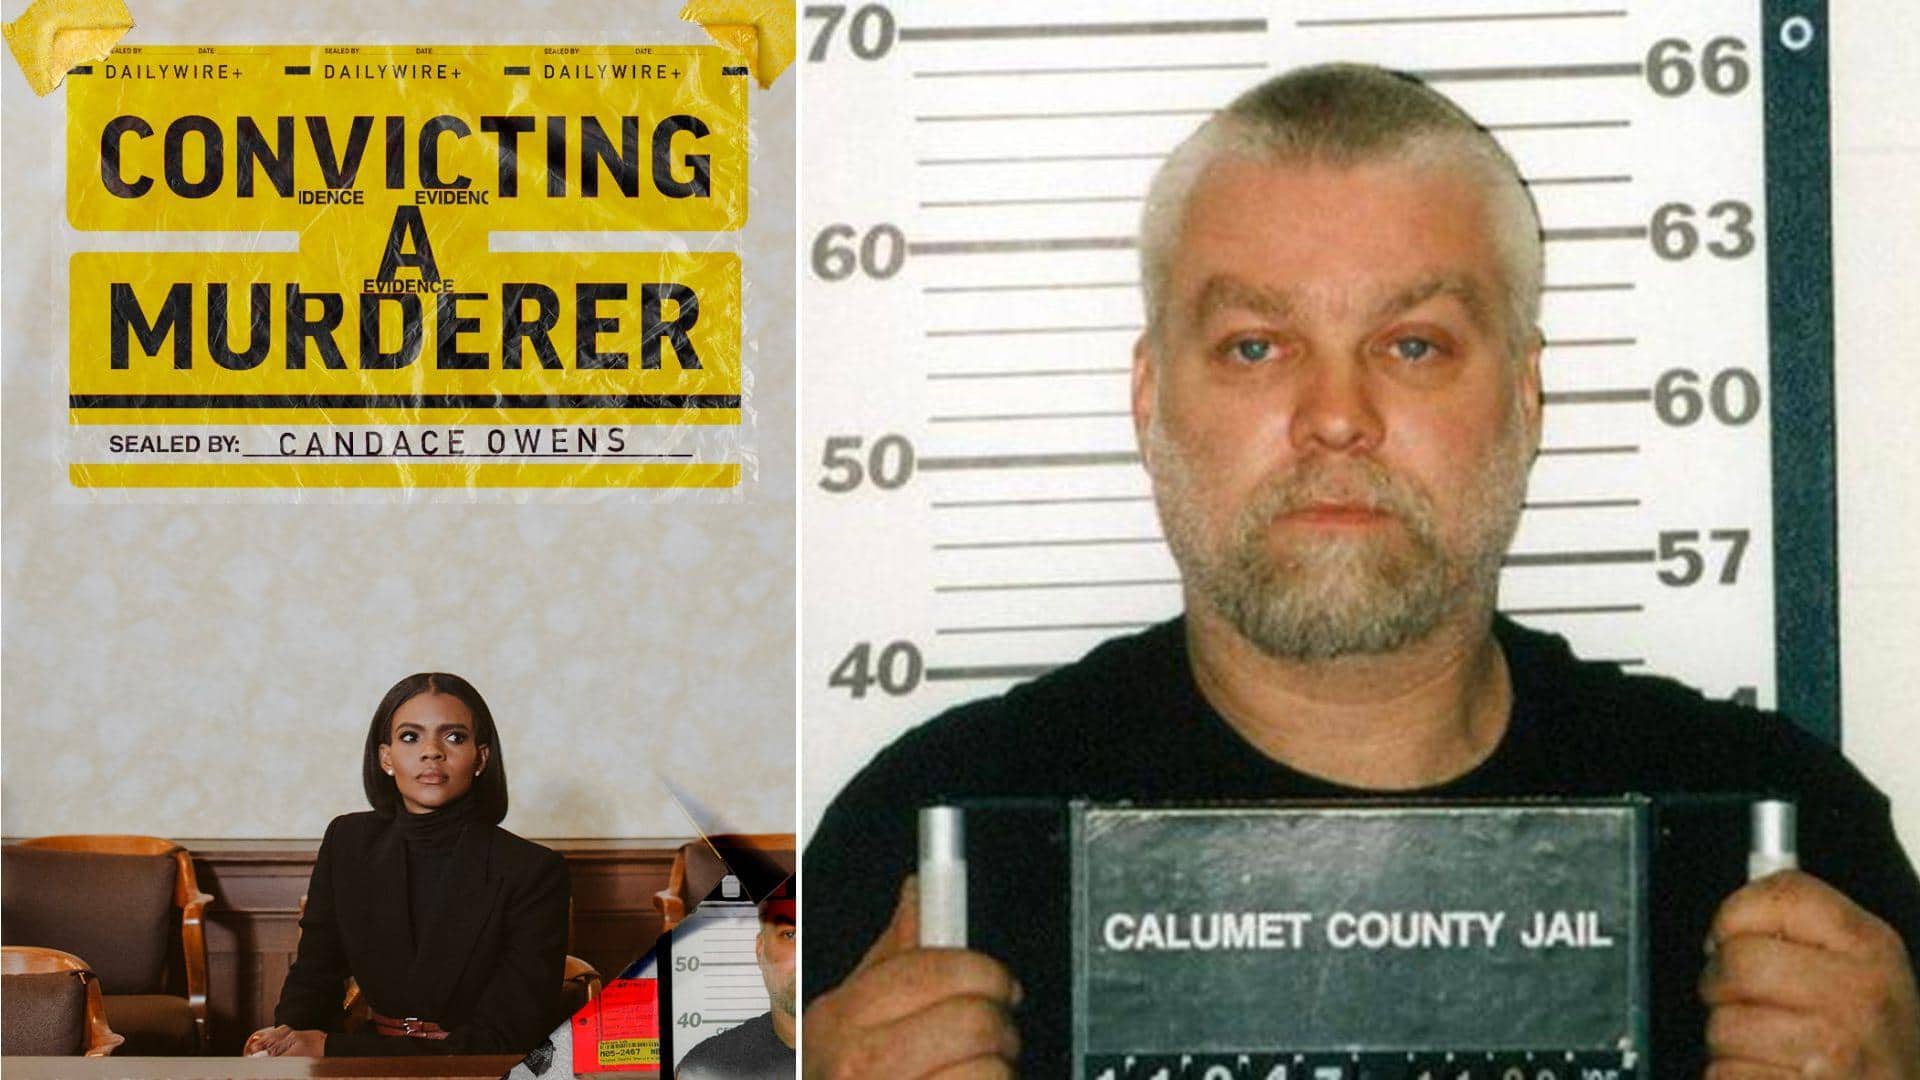 'Convicting a Murderer': Premiere date, plot, team behind—everything to know